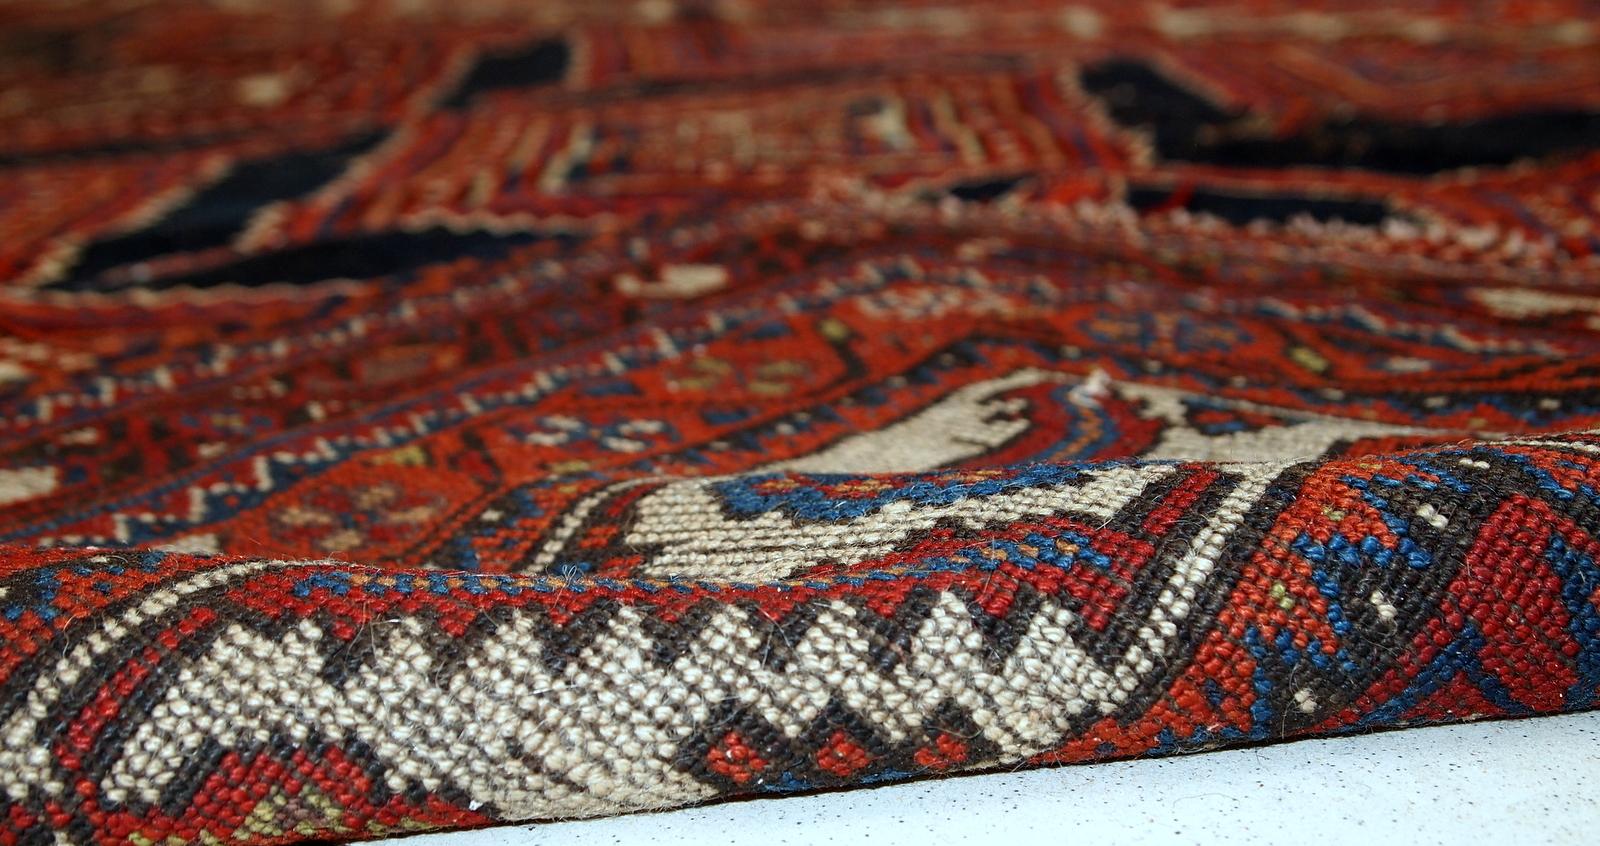 Antique Shiraz rug in distressed condition. The rug made in traditional tribal design in the beginning of 20th century.
?
-condition: distressed,

-circa 1900s,

-size: 4.9' x 11.2' (152cm x 342cm),

-material: wool,

-country of origin: